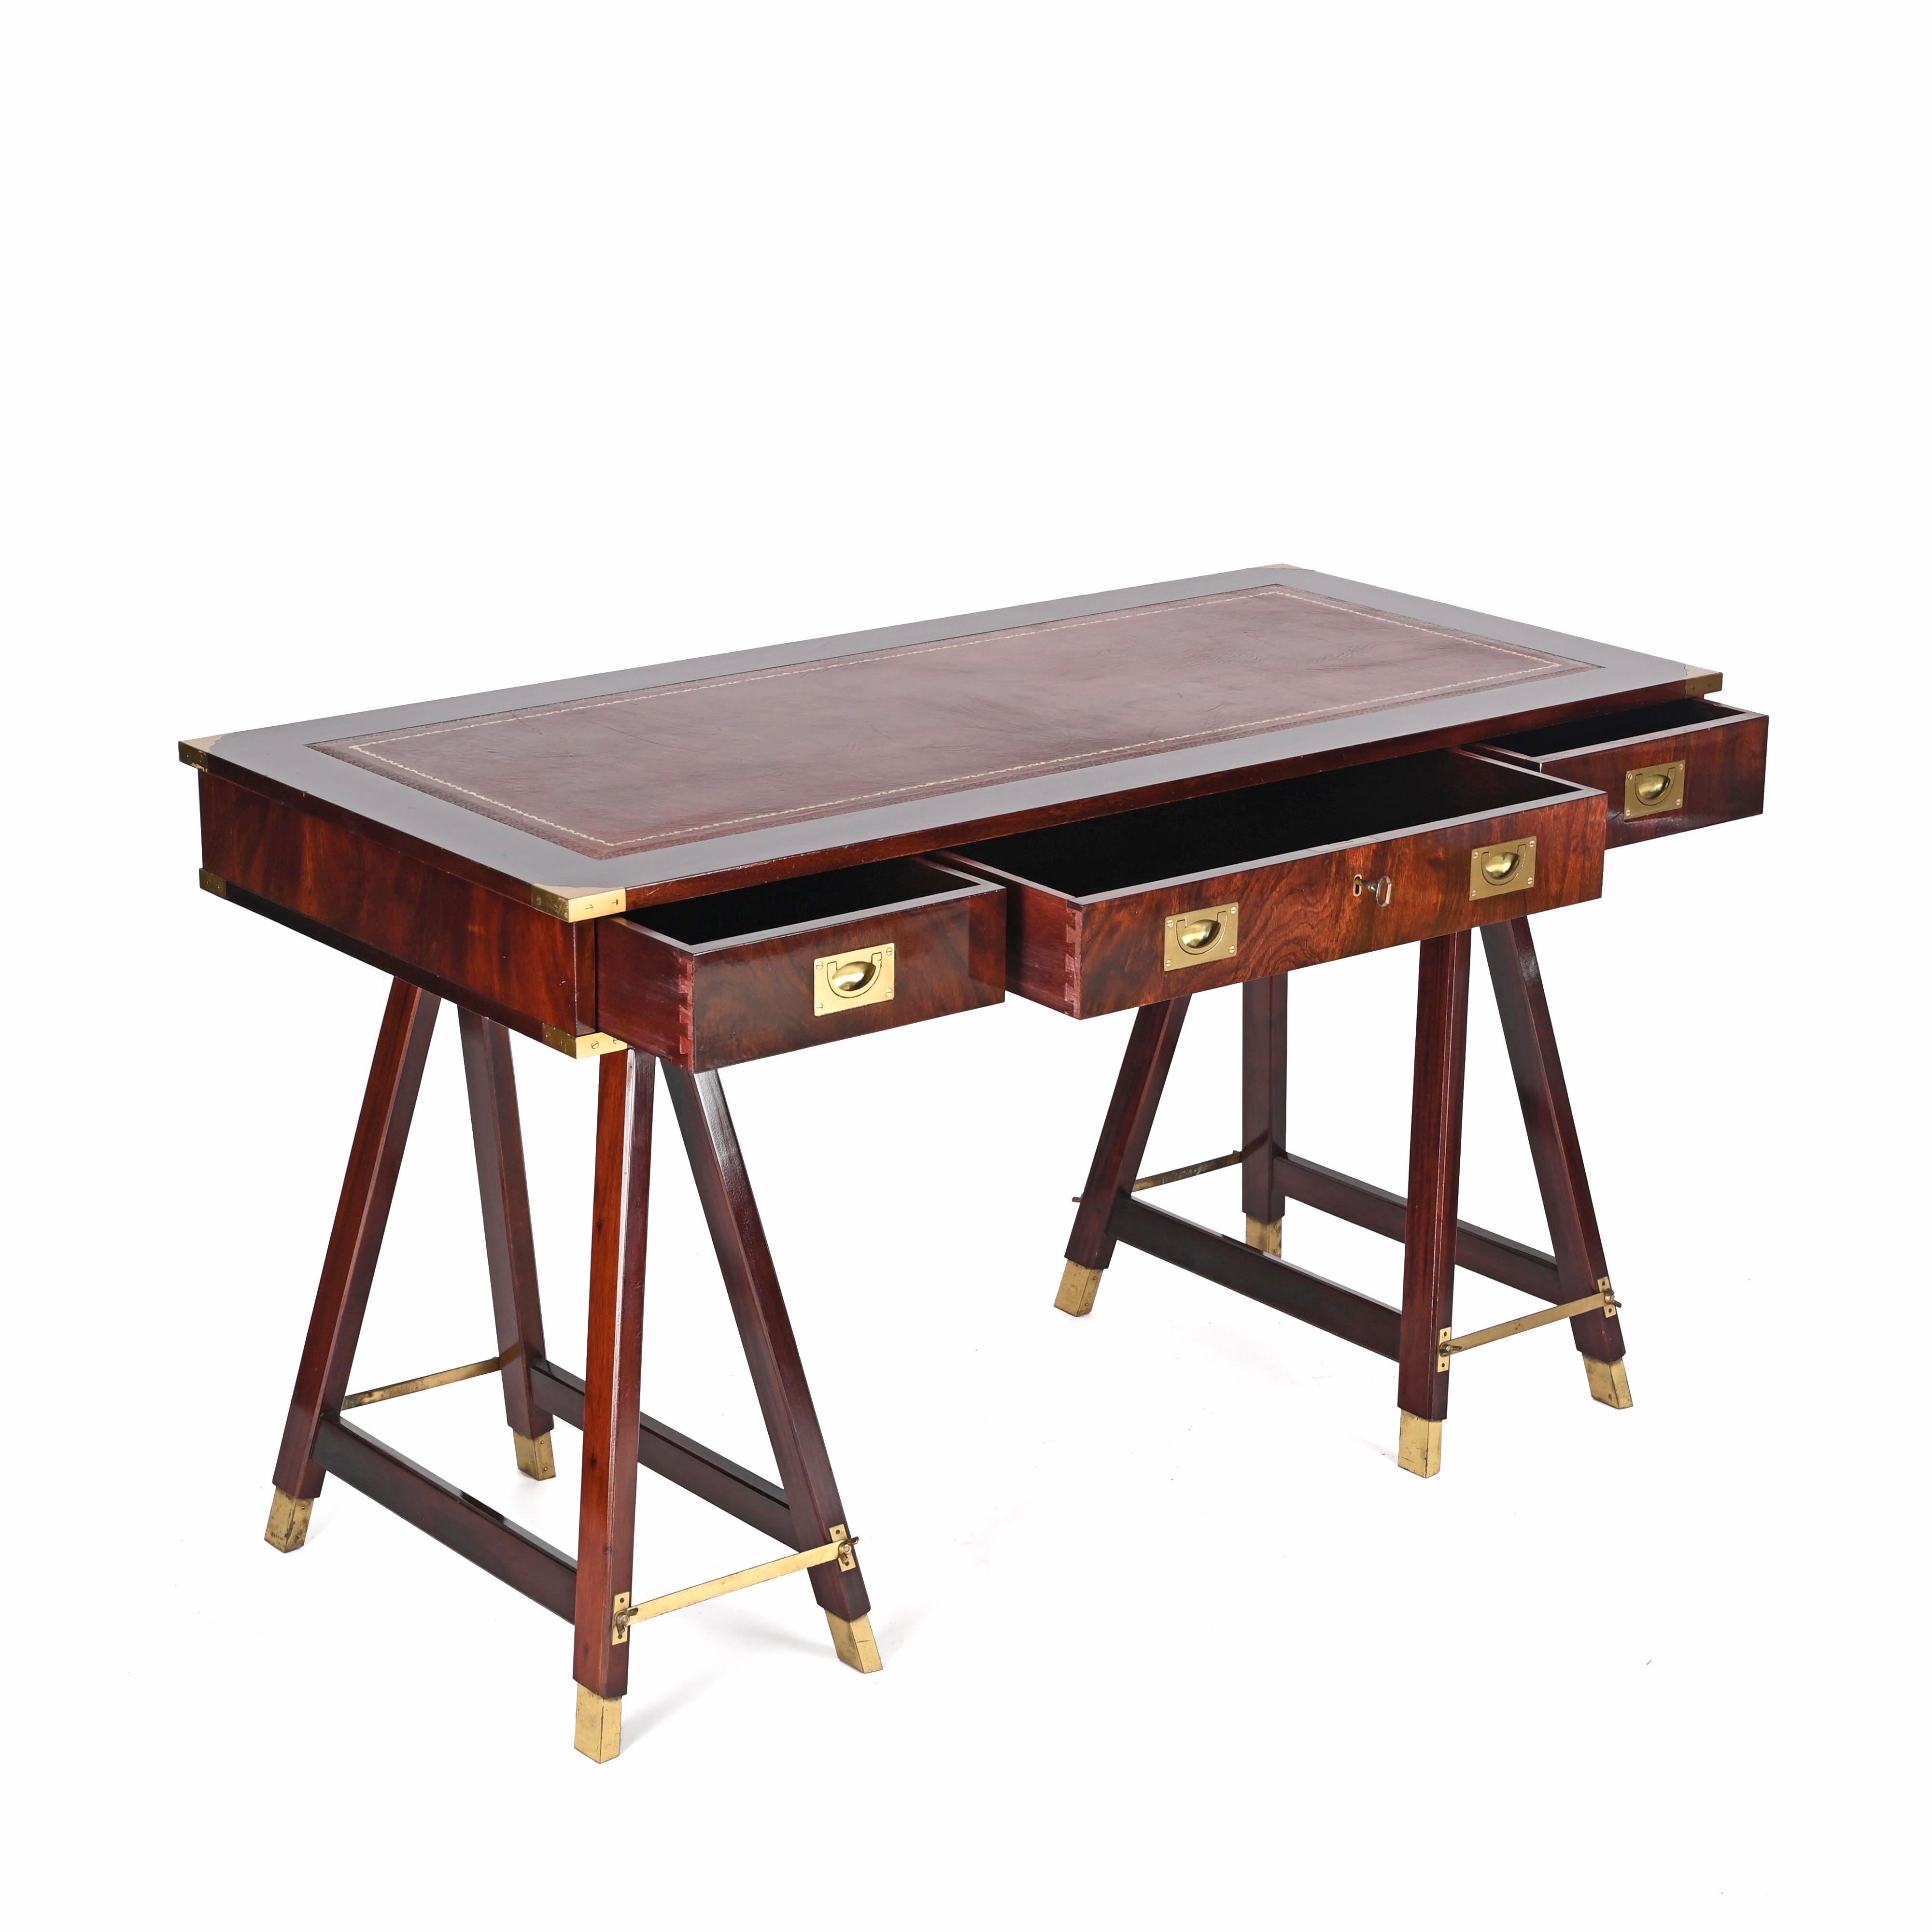 Metal Italian Military Campaign Style Wood and Brass Desk with Leather Top, 1960s